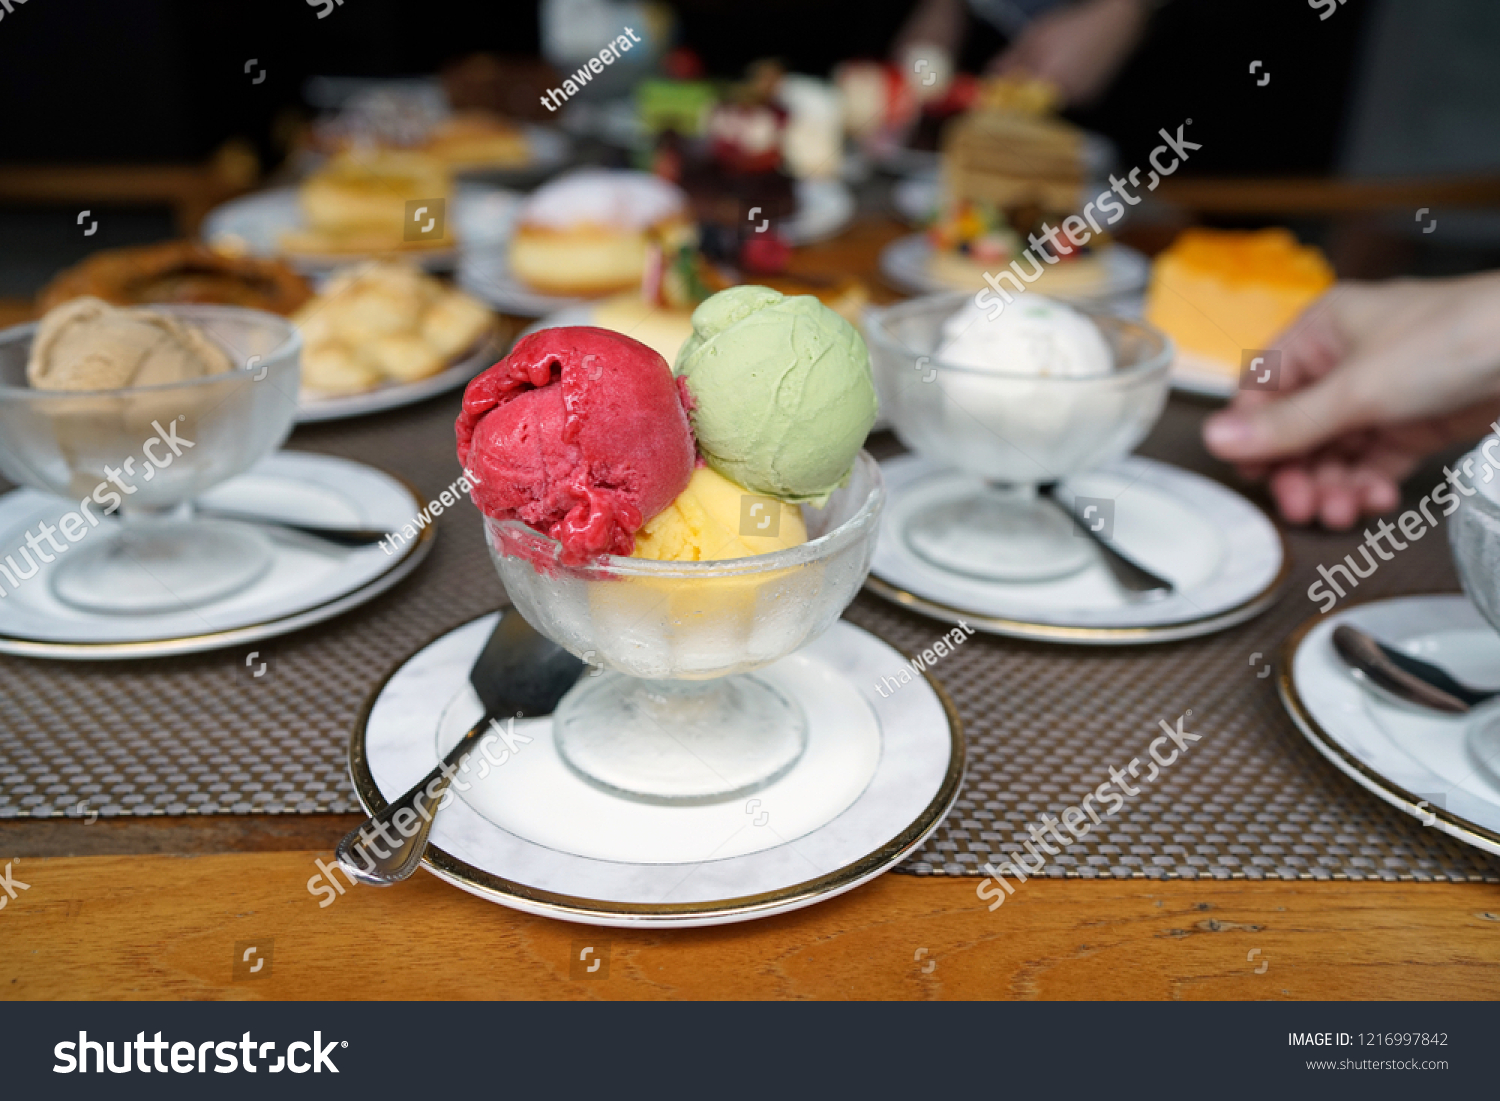 A bowl of ice cream scoops of various flavored, including raspberry, mango and matcha green tea flavours on dessert background. #1216997842